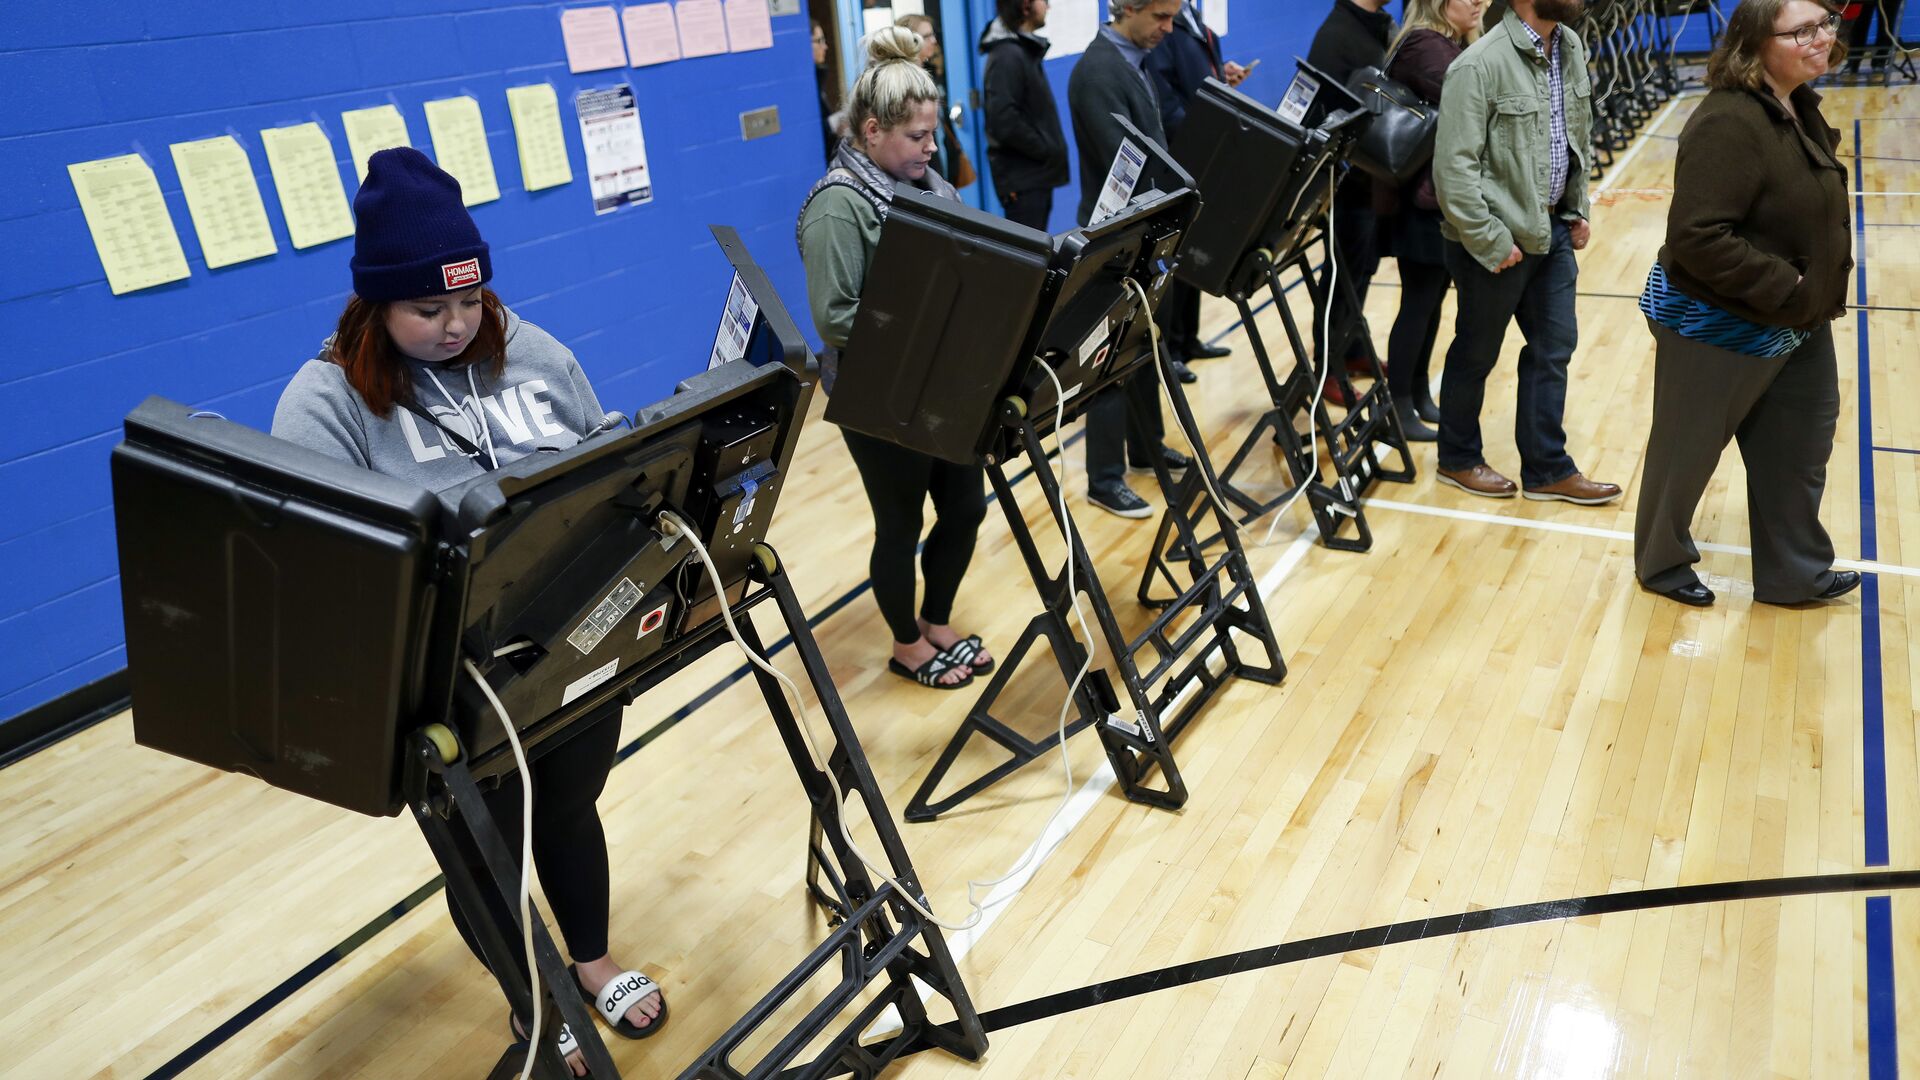 Voters in Ohio cast their ballots electronically during the 2018 midterm elections - Sputnik International, 1920, 05.08.2022